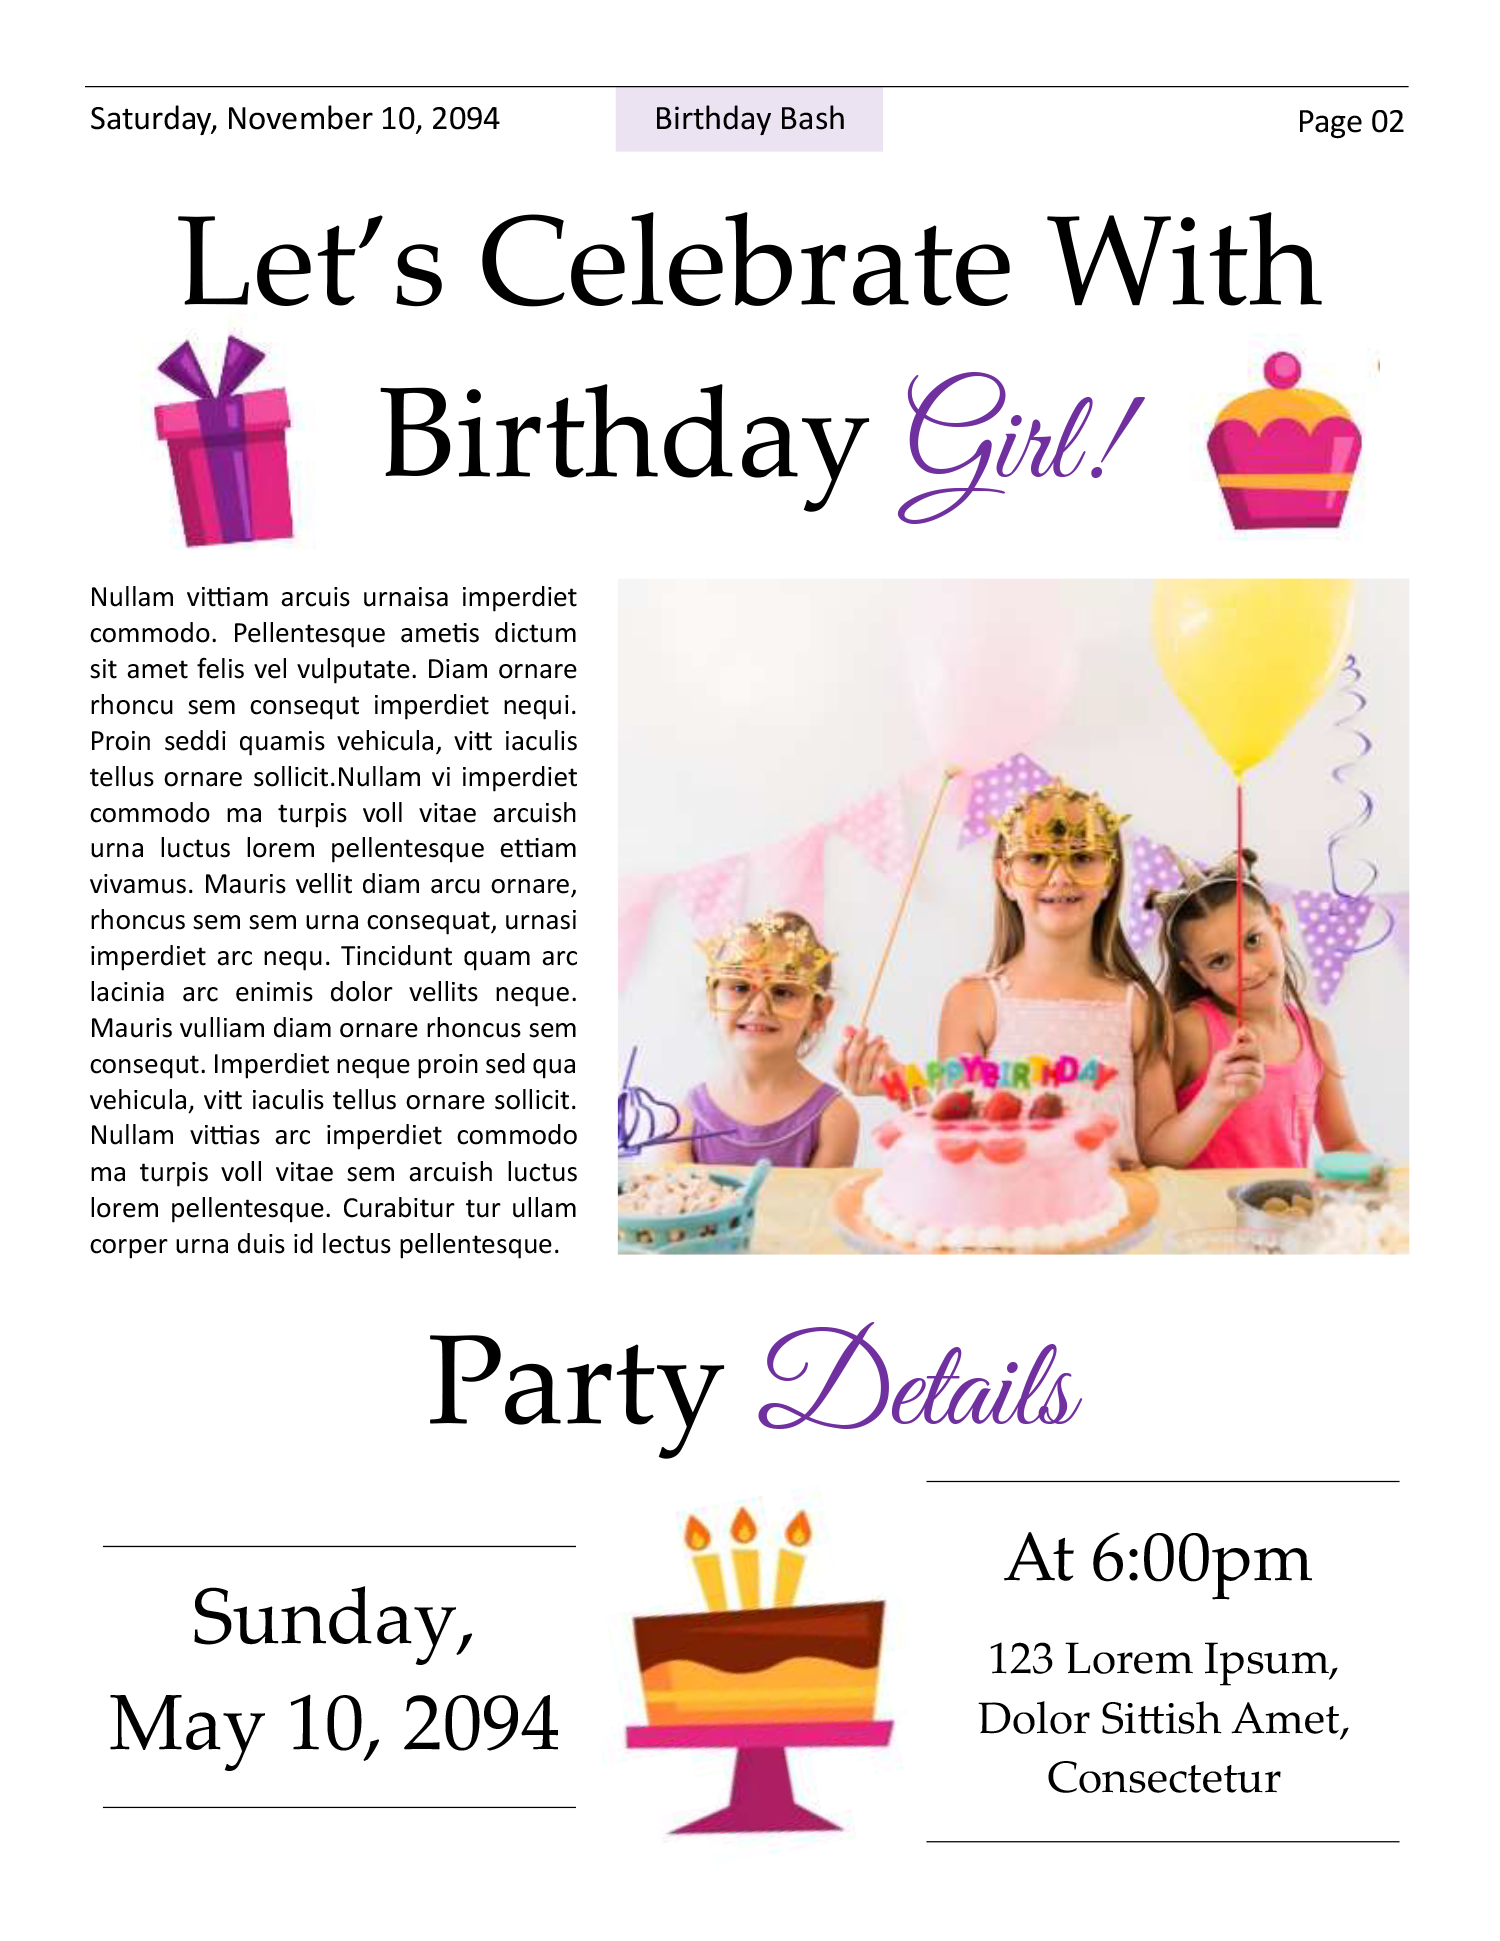 4 Page Birthday Celebration Newspaper Template - Page 02